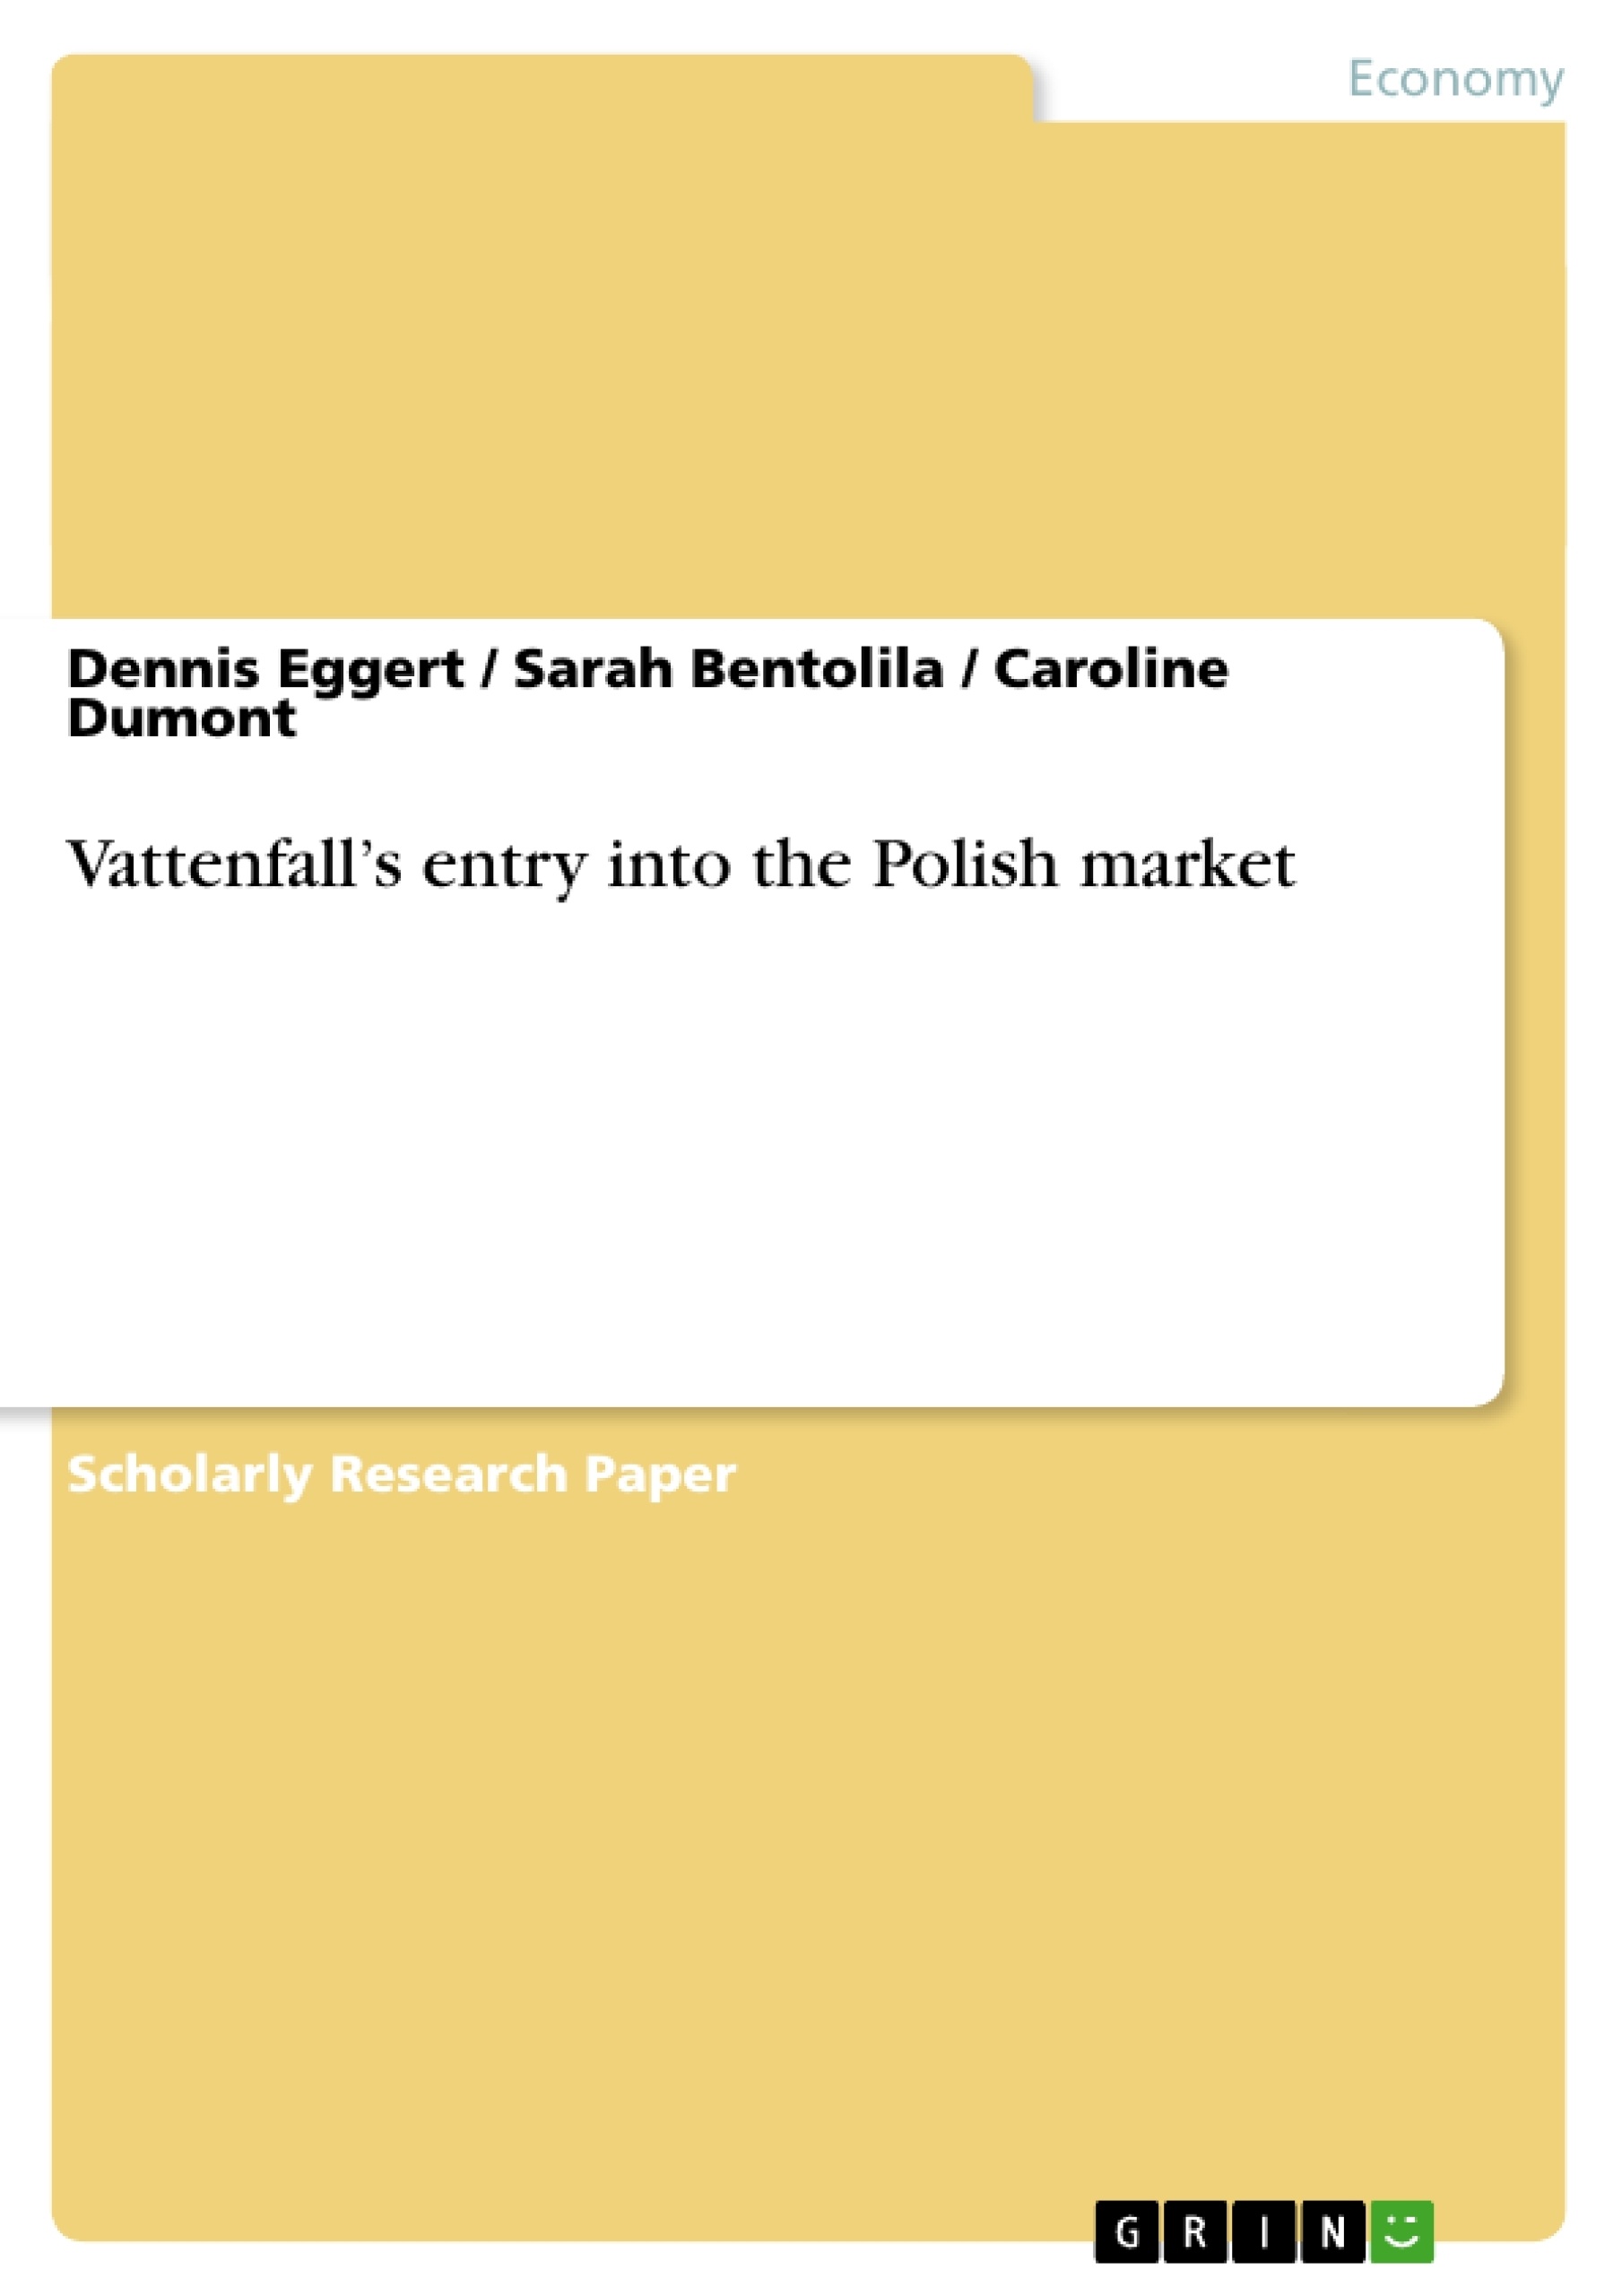 Title: Vattenfall’s entry into the Polish market